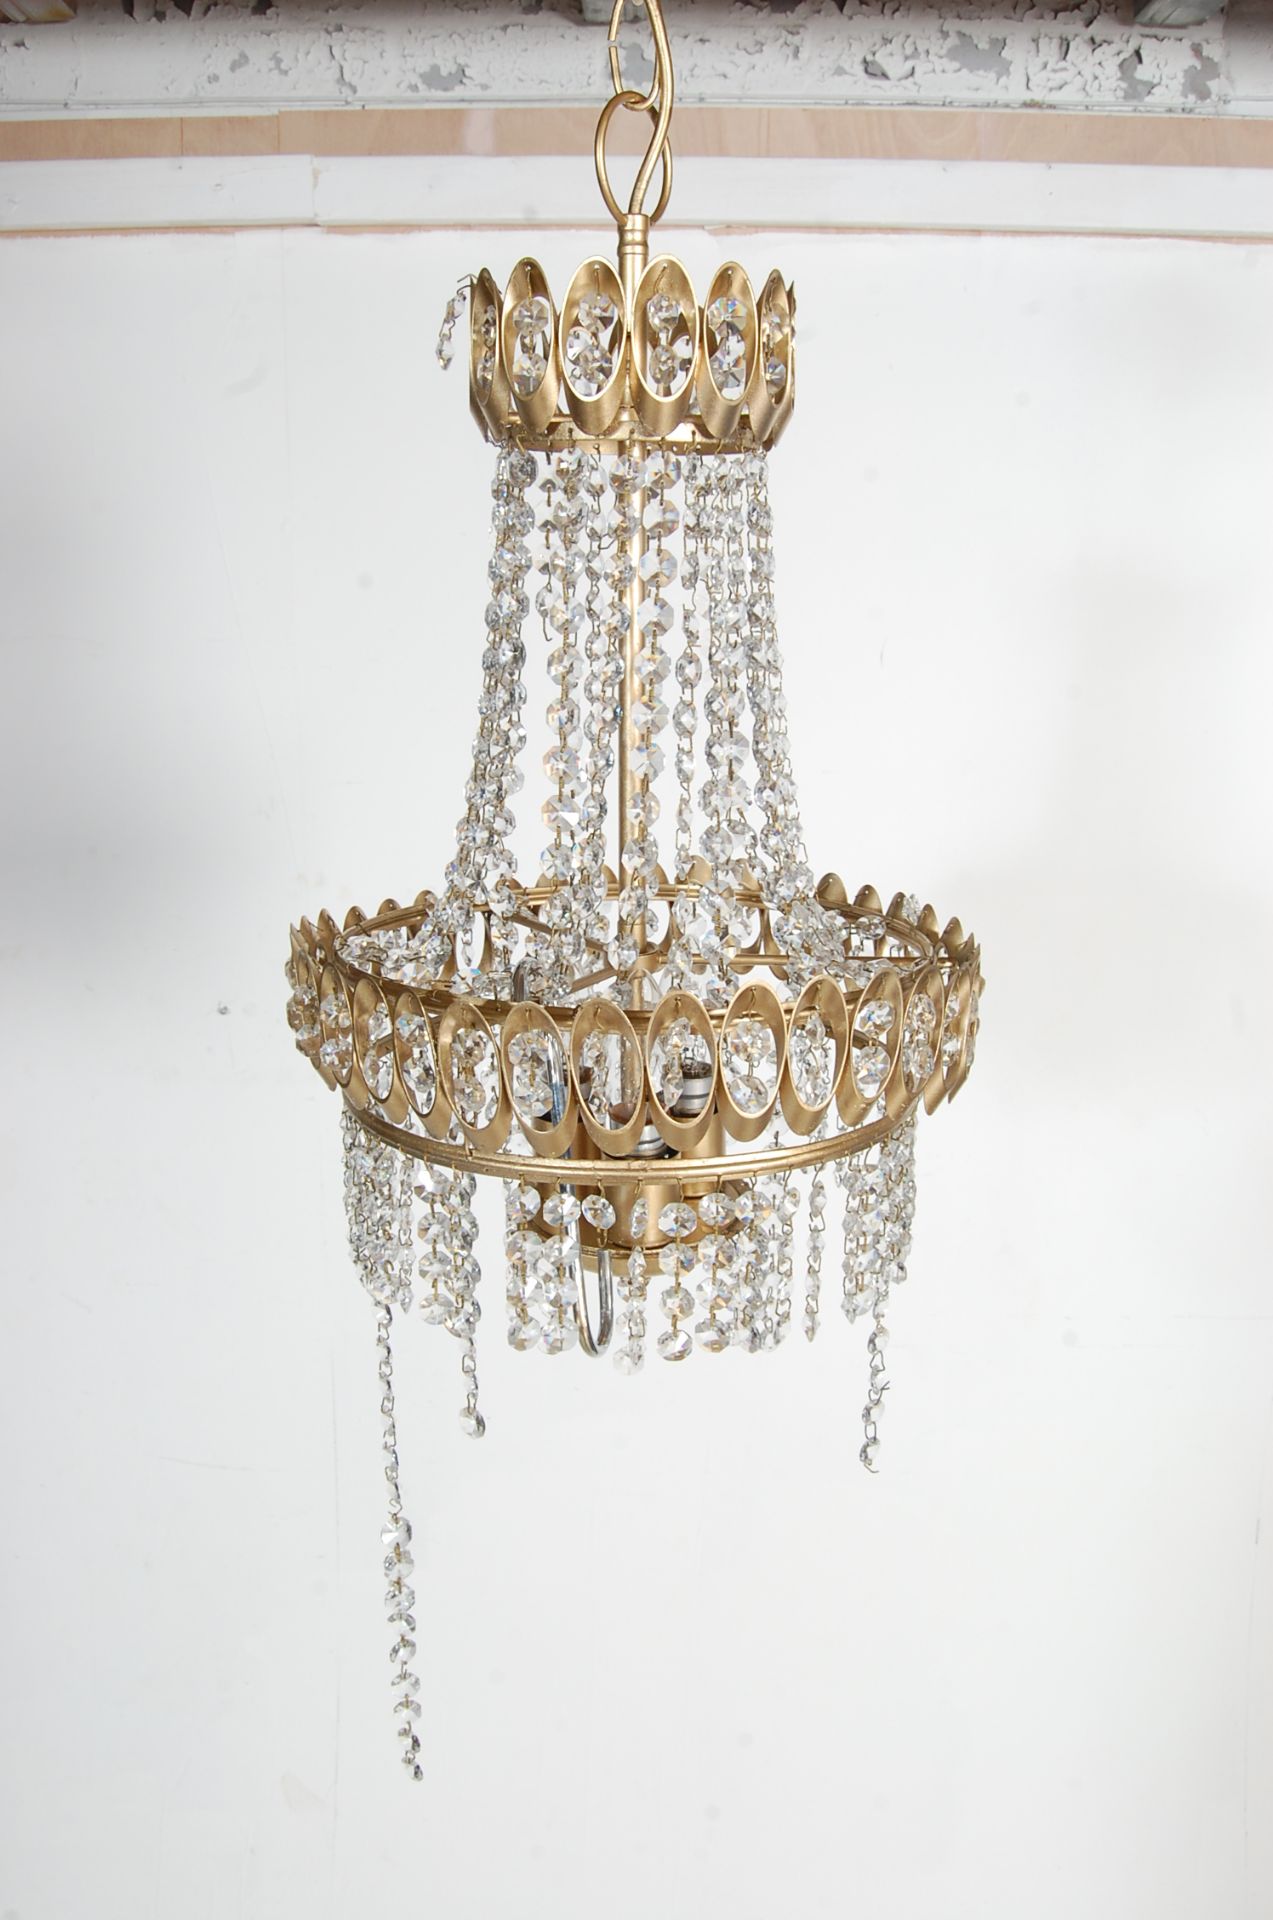 ANTIQUE VICTORIAN STYLE BRASS AND GLASS CHANDELIER